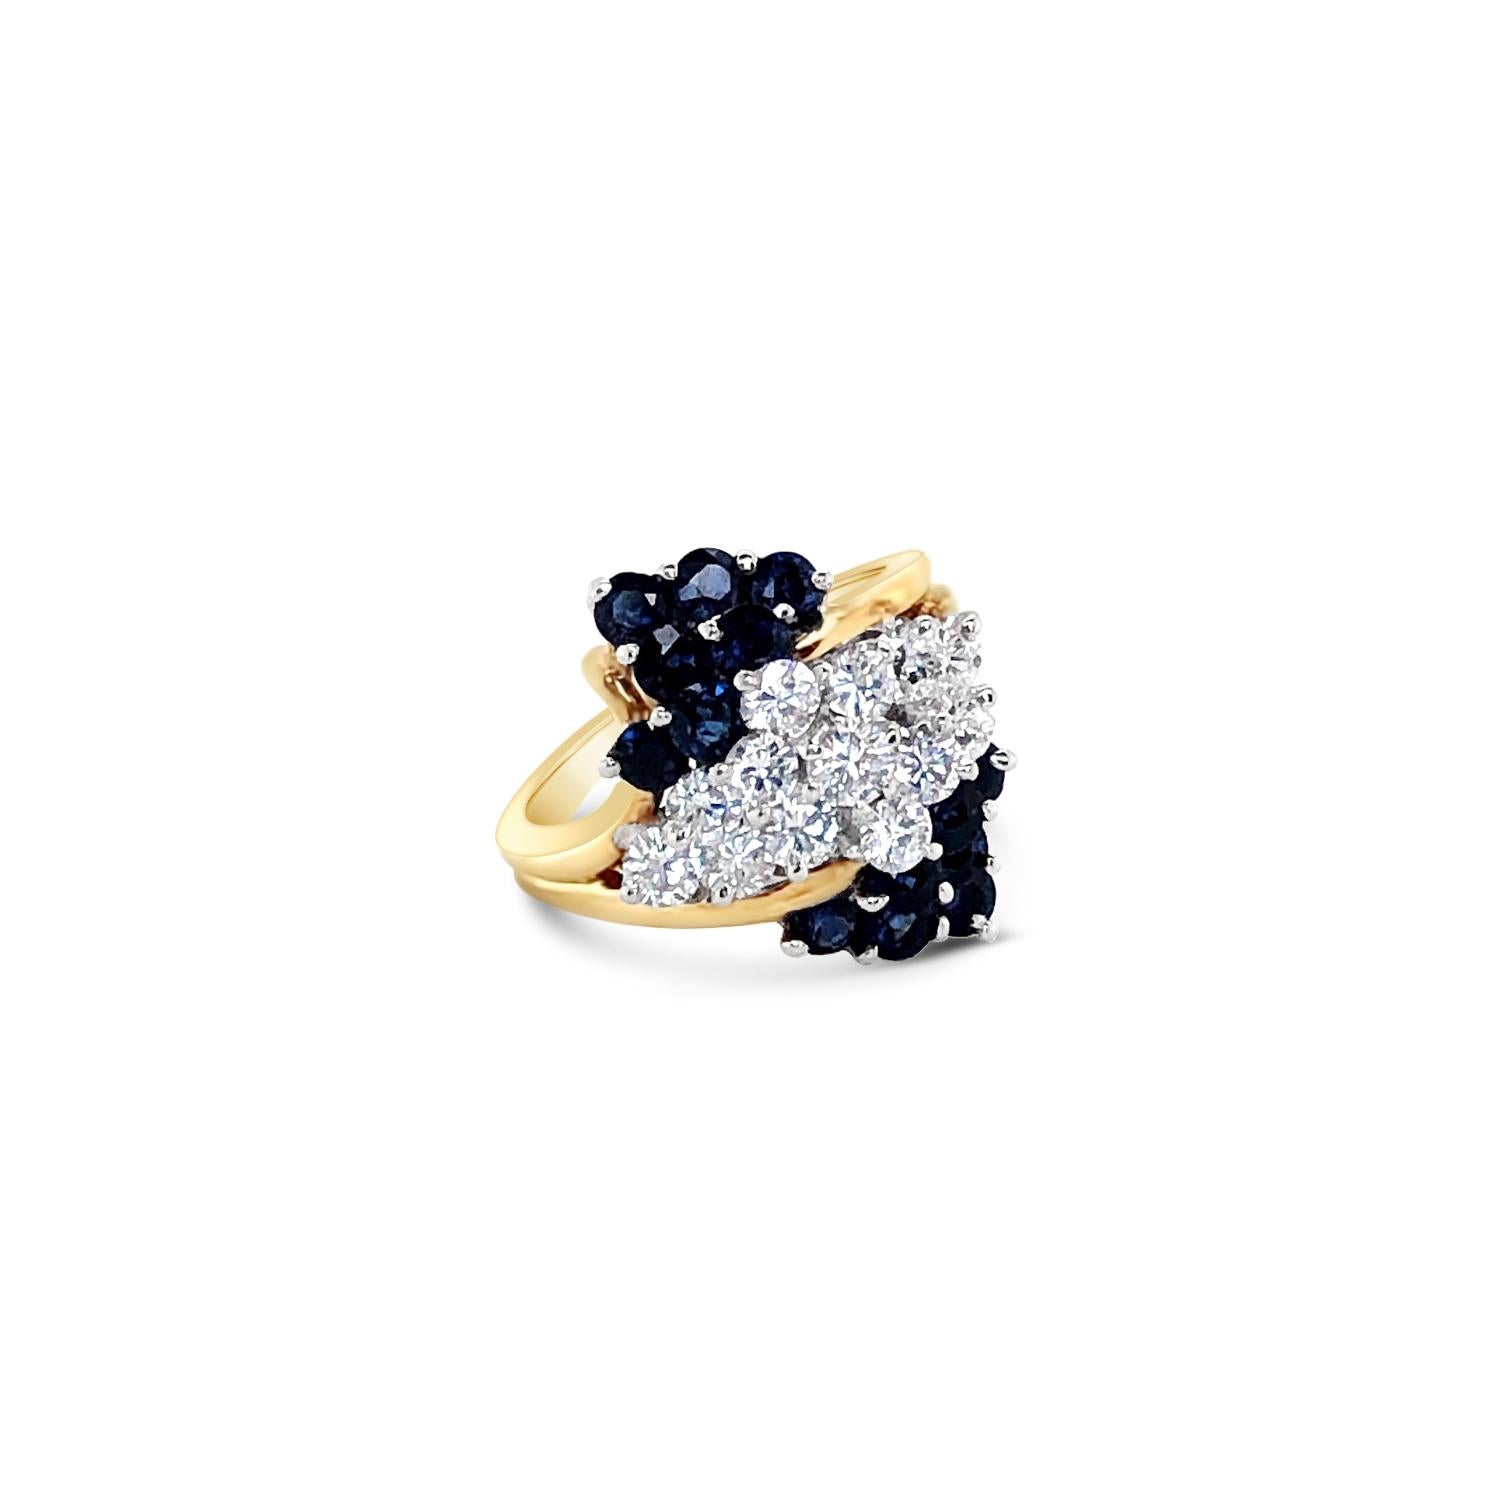 1.96 Carat (total weight) Sapphire and 1.33 Carat (total weight) Brilliant Cut Diamond Cluster Ring set in Platinum mounting with 18K Yellow Gold ring.